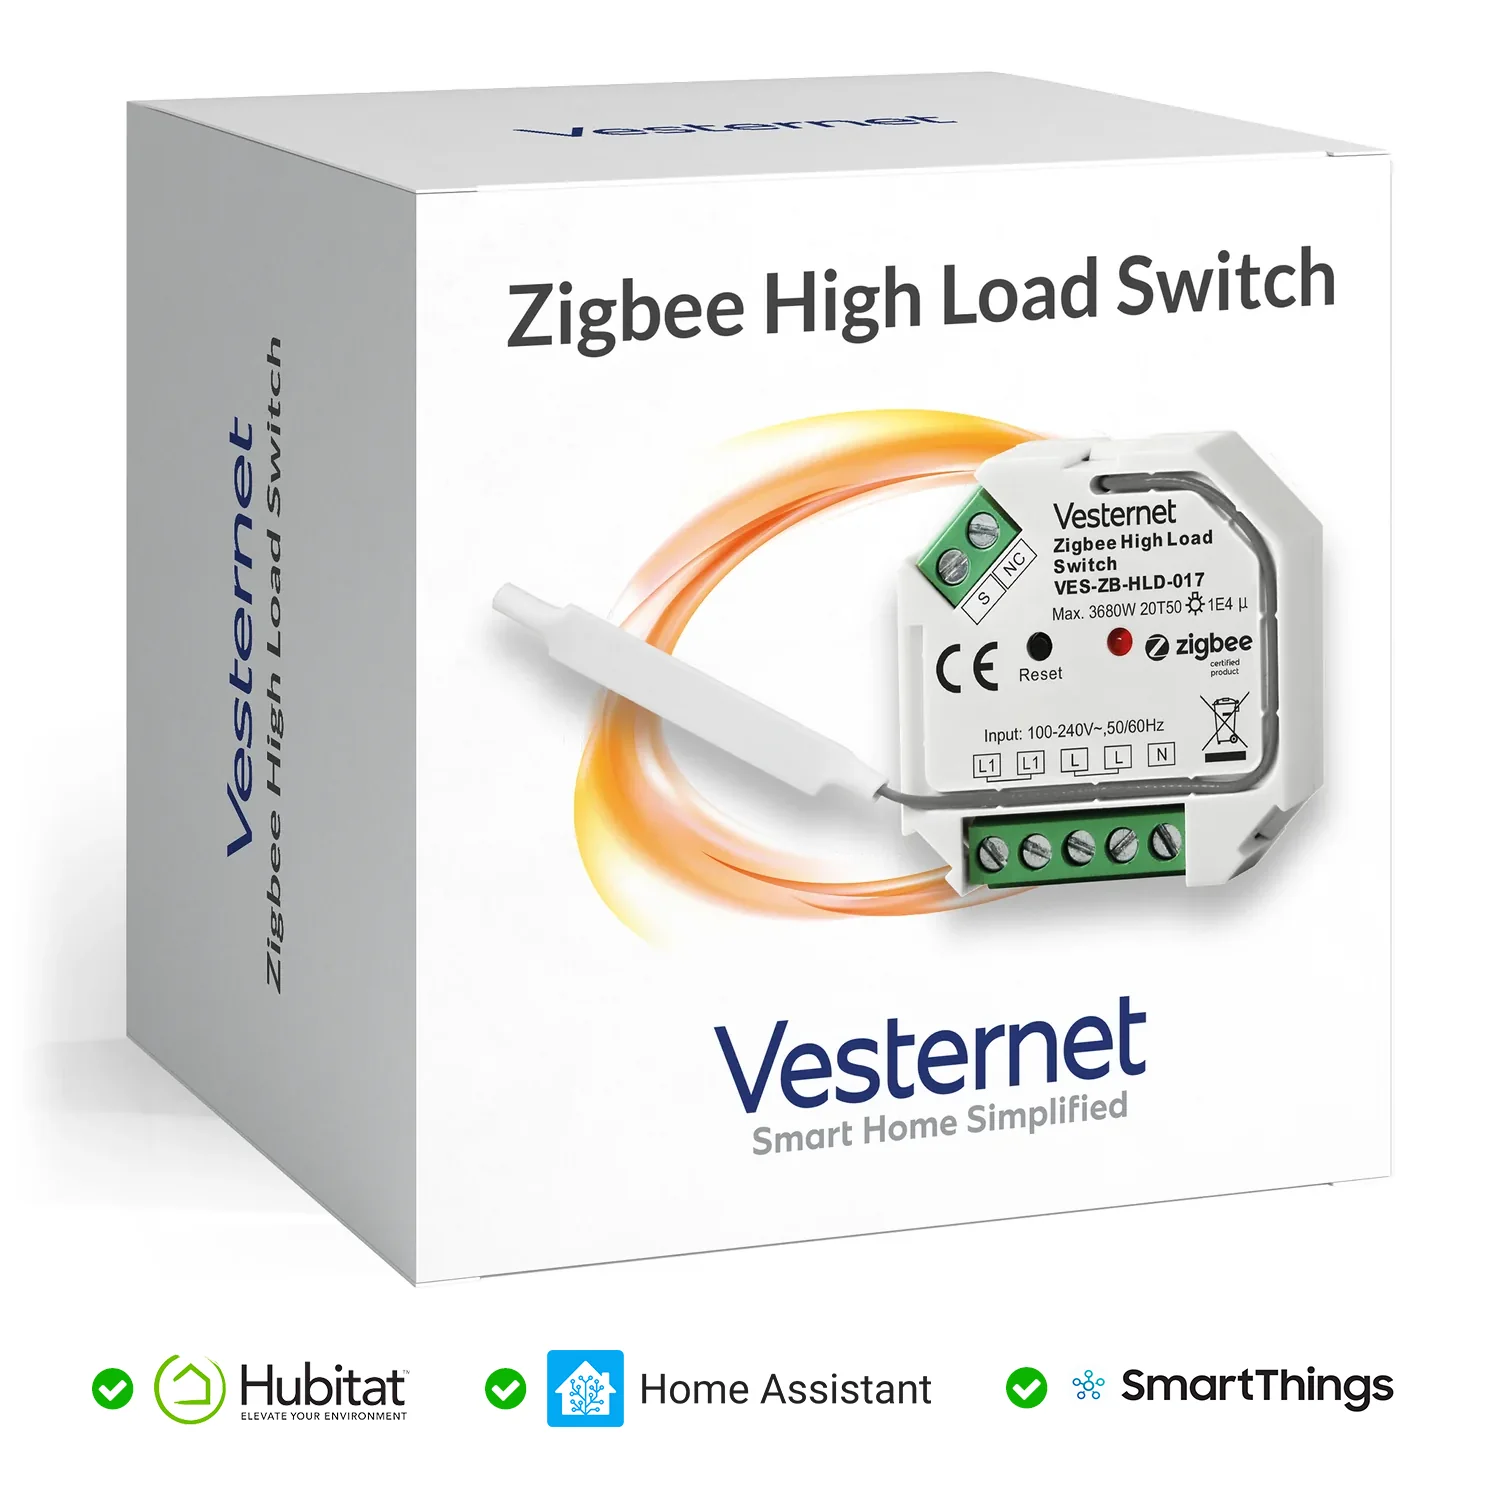 Vesternet Zigbee High Load Switch Questions & Answers